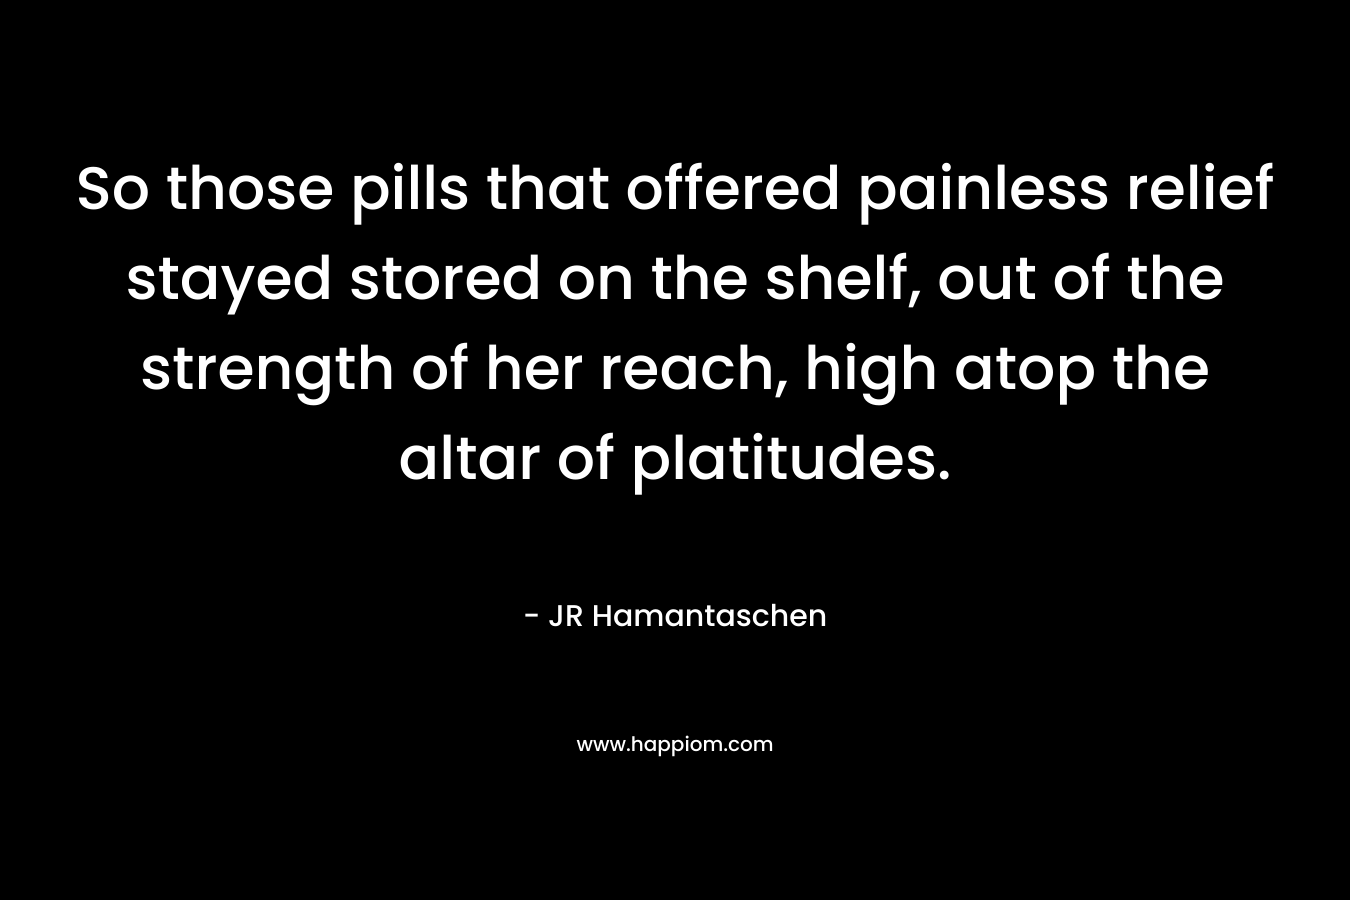 So those pills that offered painless relief stayed stored on the shelf, out of the strength of her reach, high atop the altar of platitudes. – JR Hamantaschen